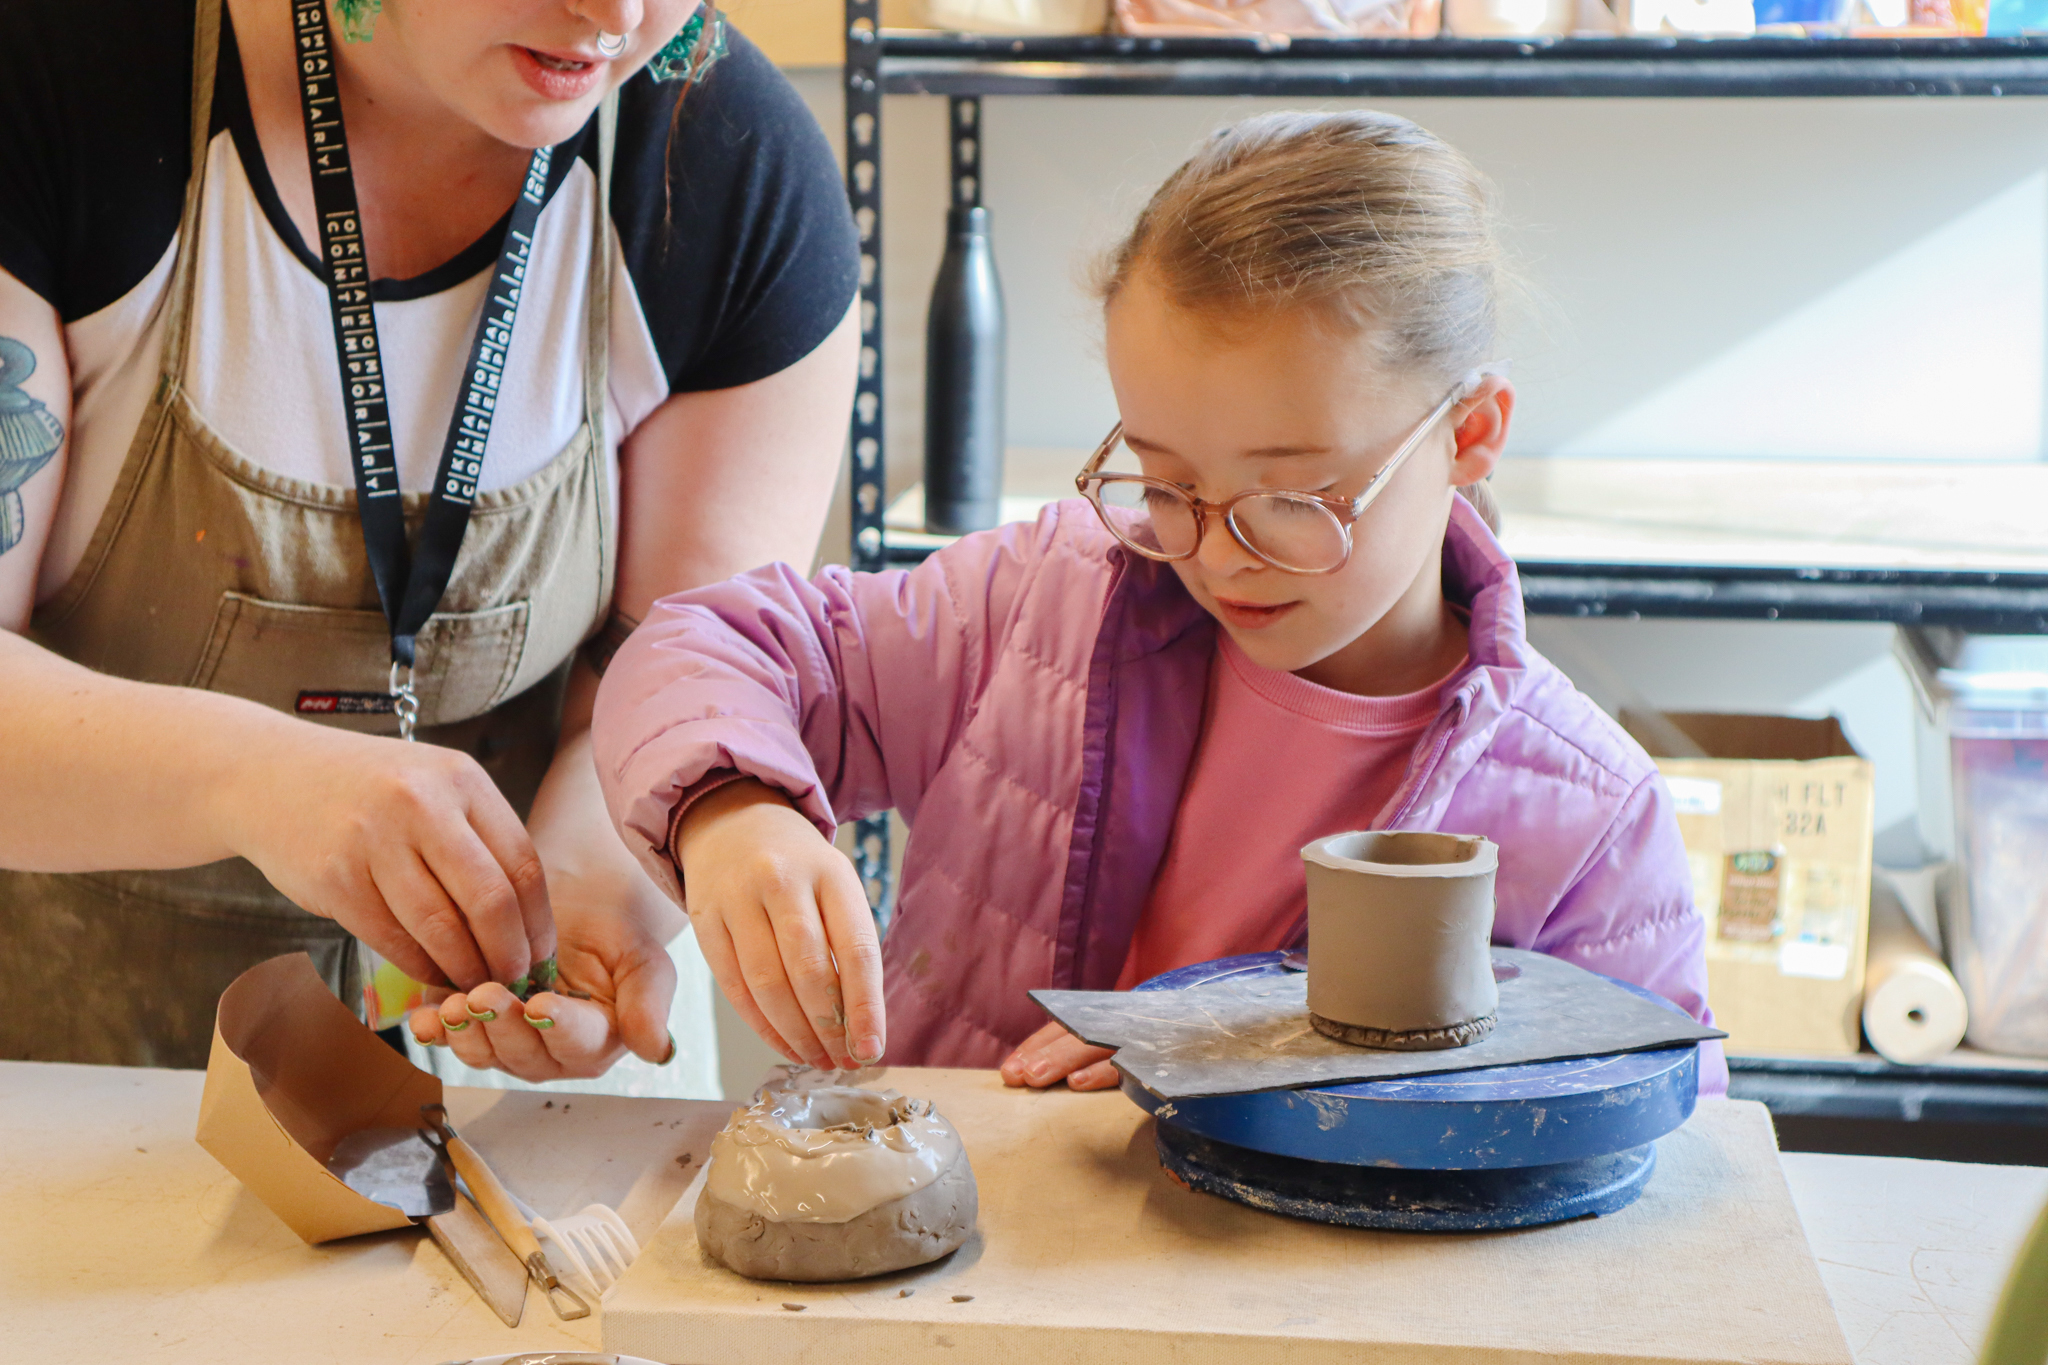 A kid is sprinkling clay sprinkles onto a clay donut. They have round glasses, a pink shirt and purple jacket on. Someone is leaning in to help them.